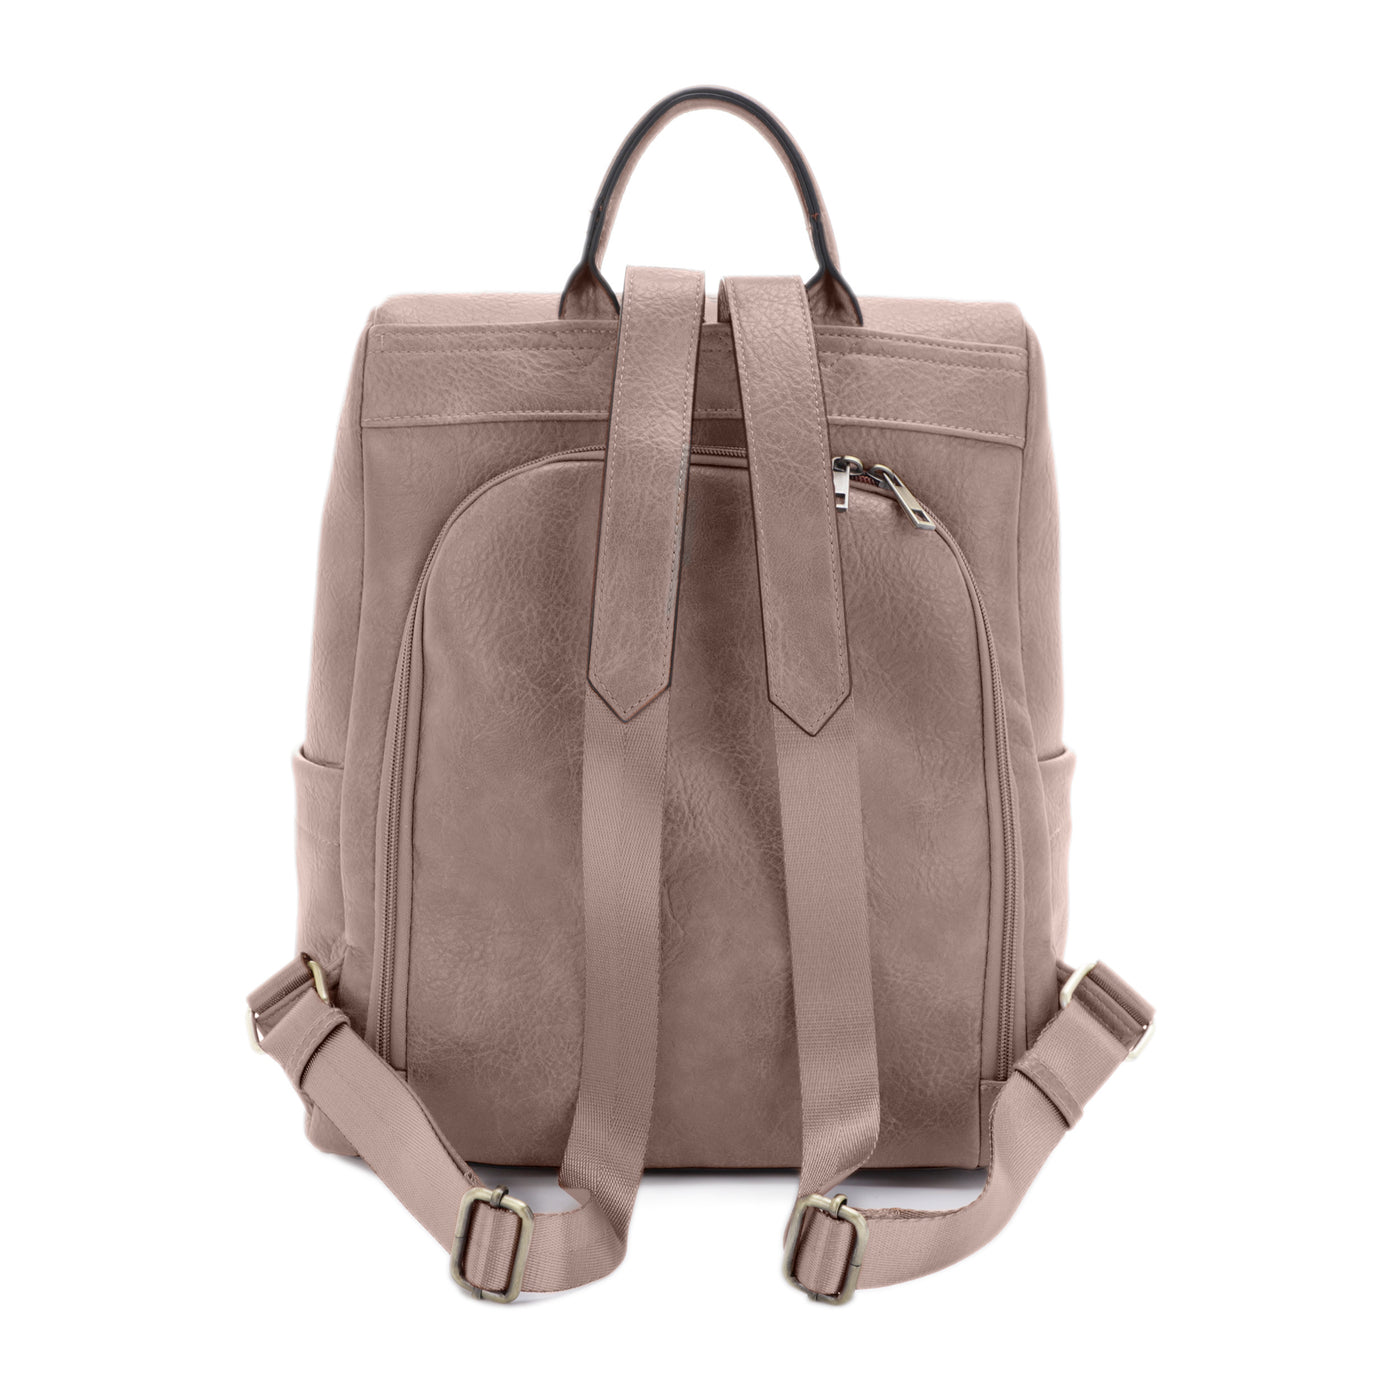 Sierra Concealed Carry Lock and Key Backpack Purse